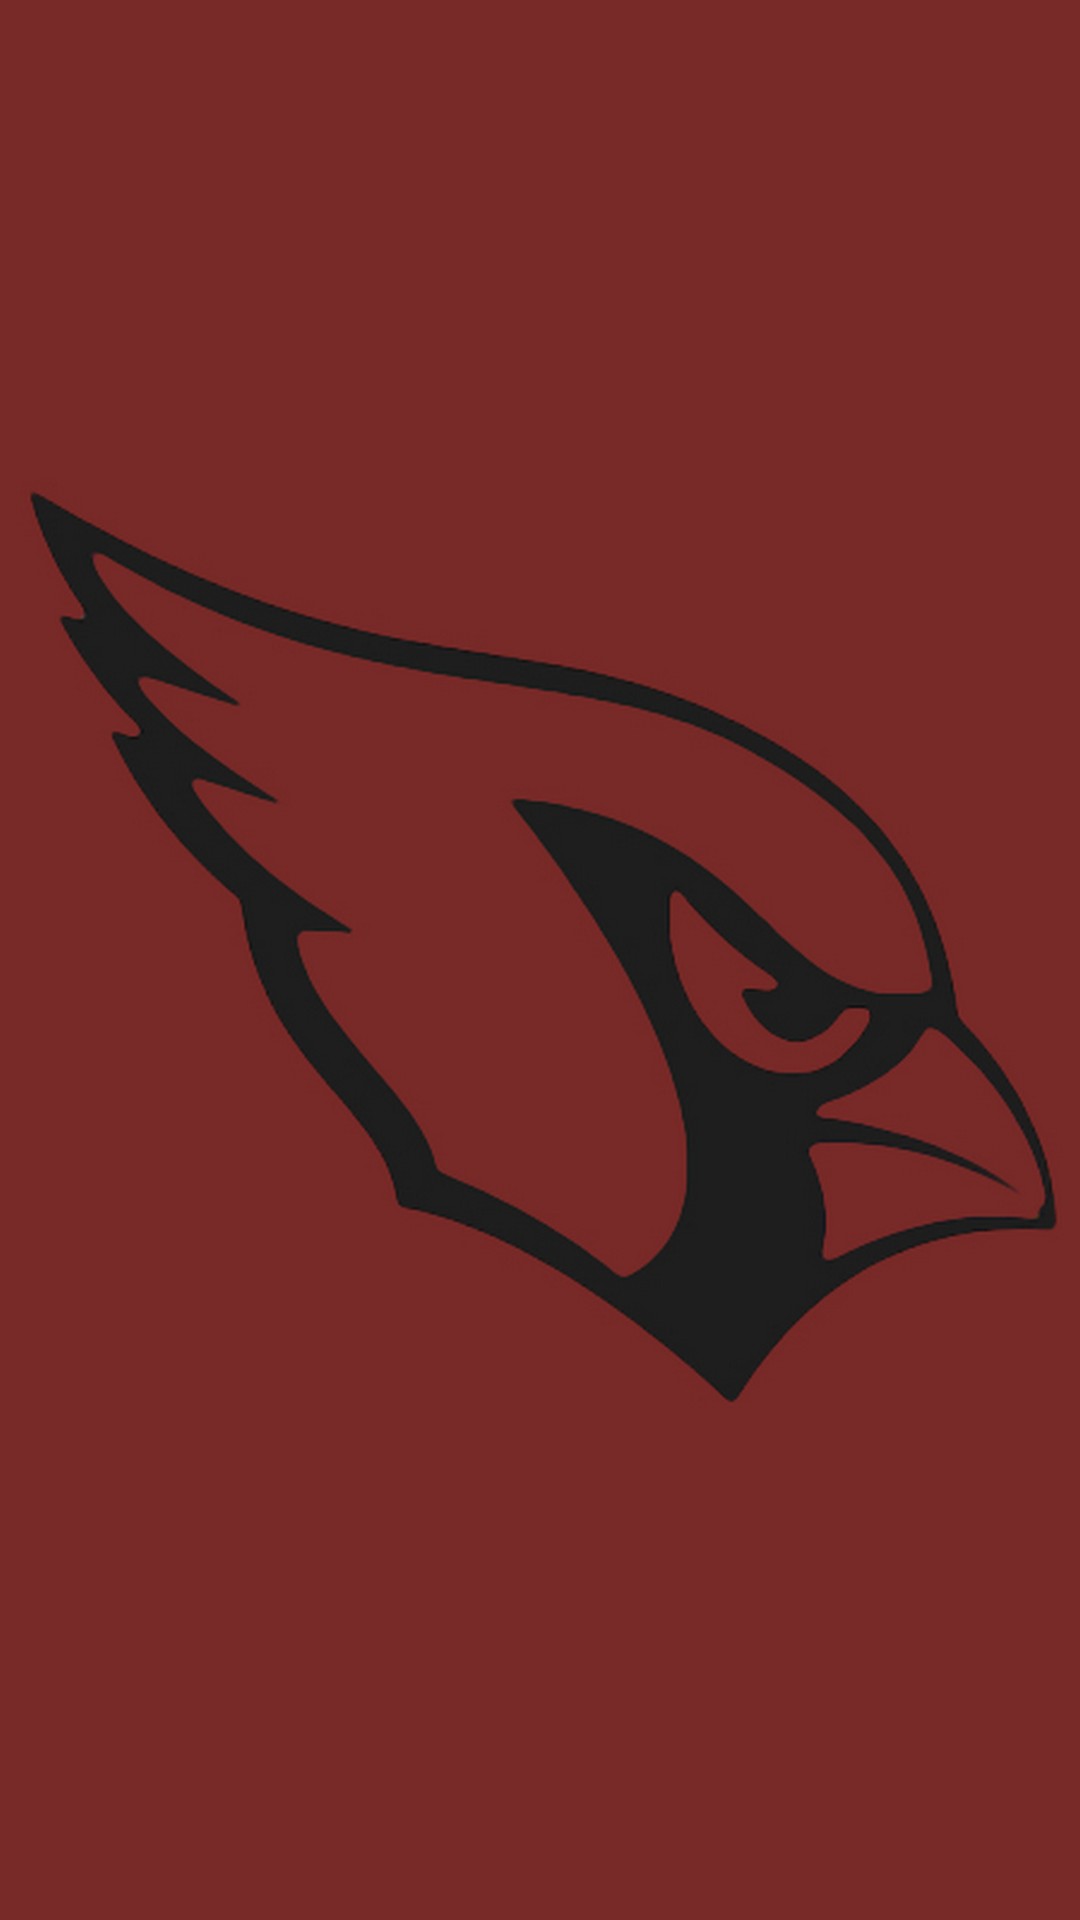 Arizona Cardinals iPhone Wallpaper HD with high-resolution 1080x1920 pixel. Download and set as wallpaper for Apple iPhone X, XS Max, XR, 8, 7, 6, SE, iPad, Android